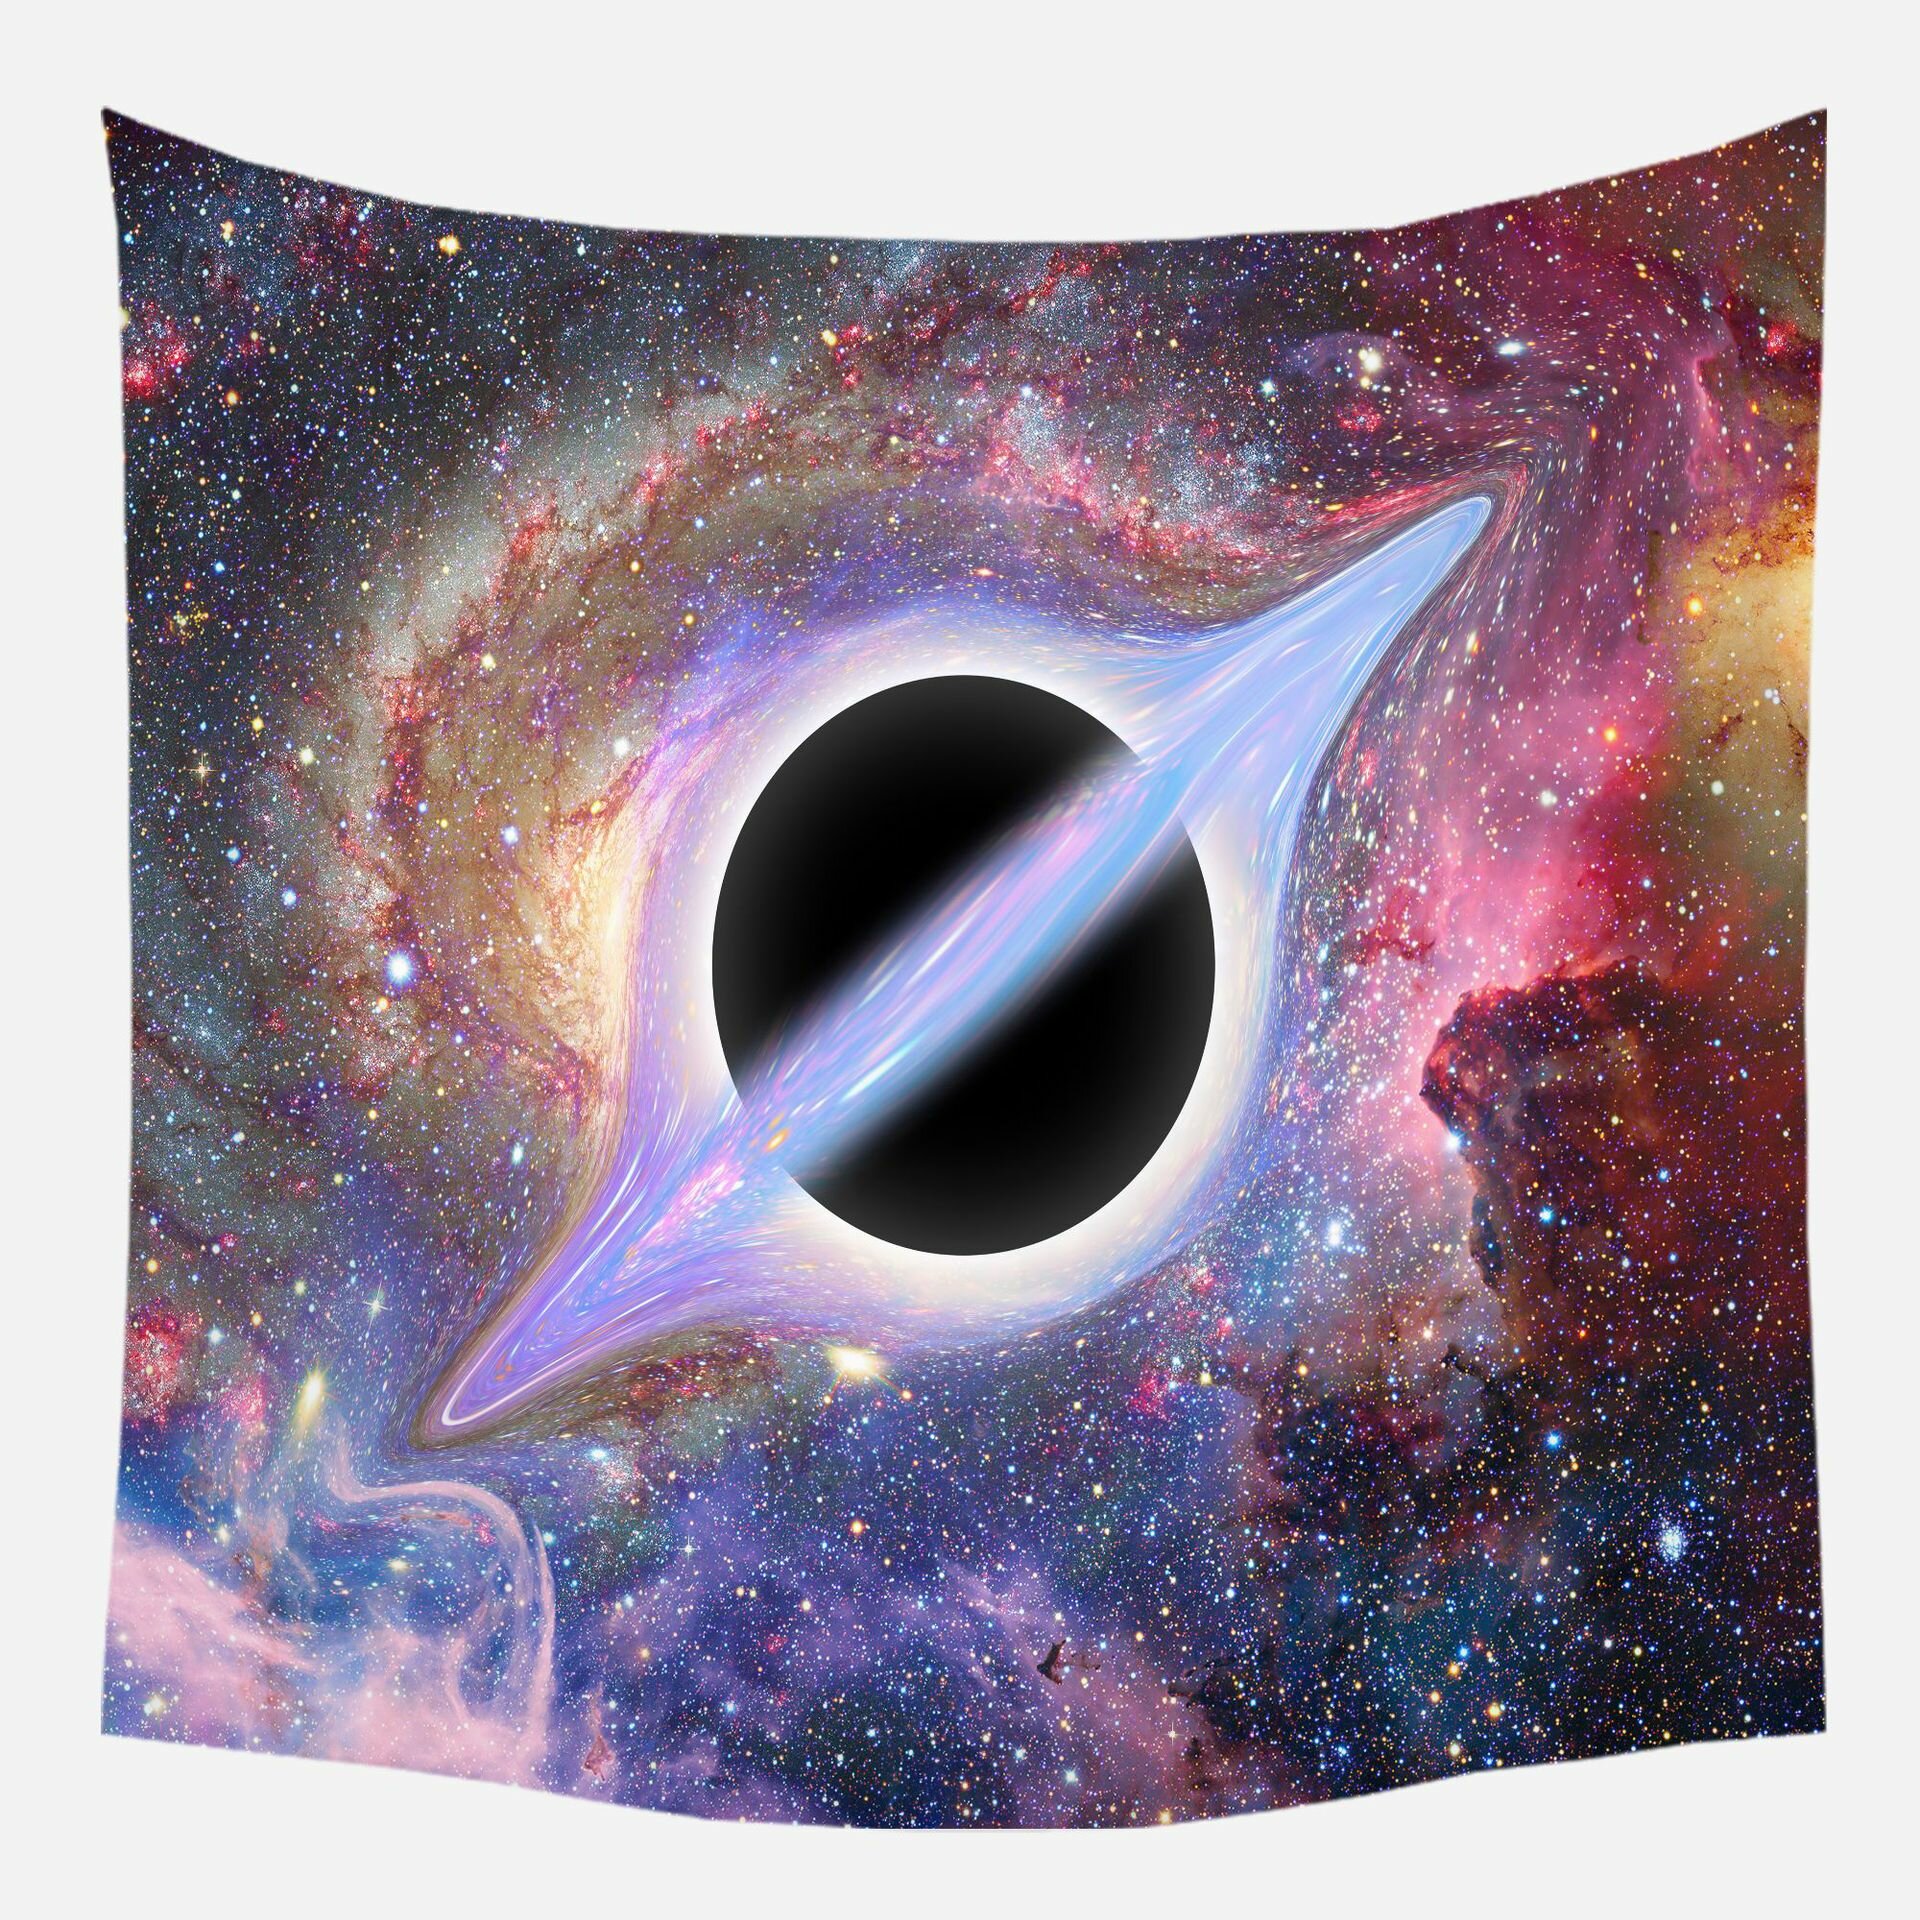 3d Universe Black Hole Galaxy Printing Tapestry Wall Hanging Tapestry Home Living Room Art Decor